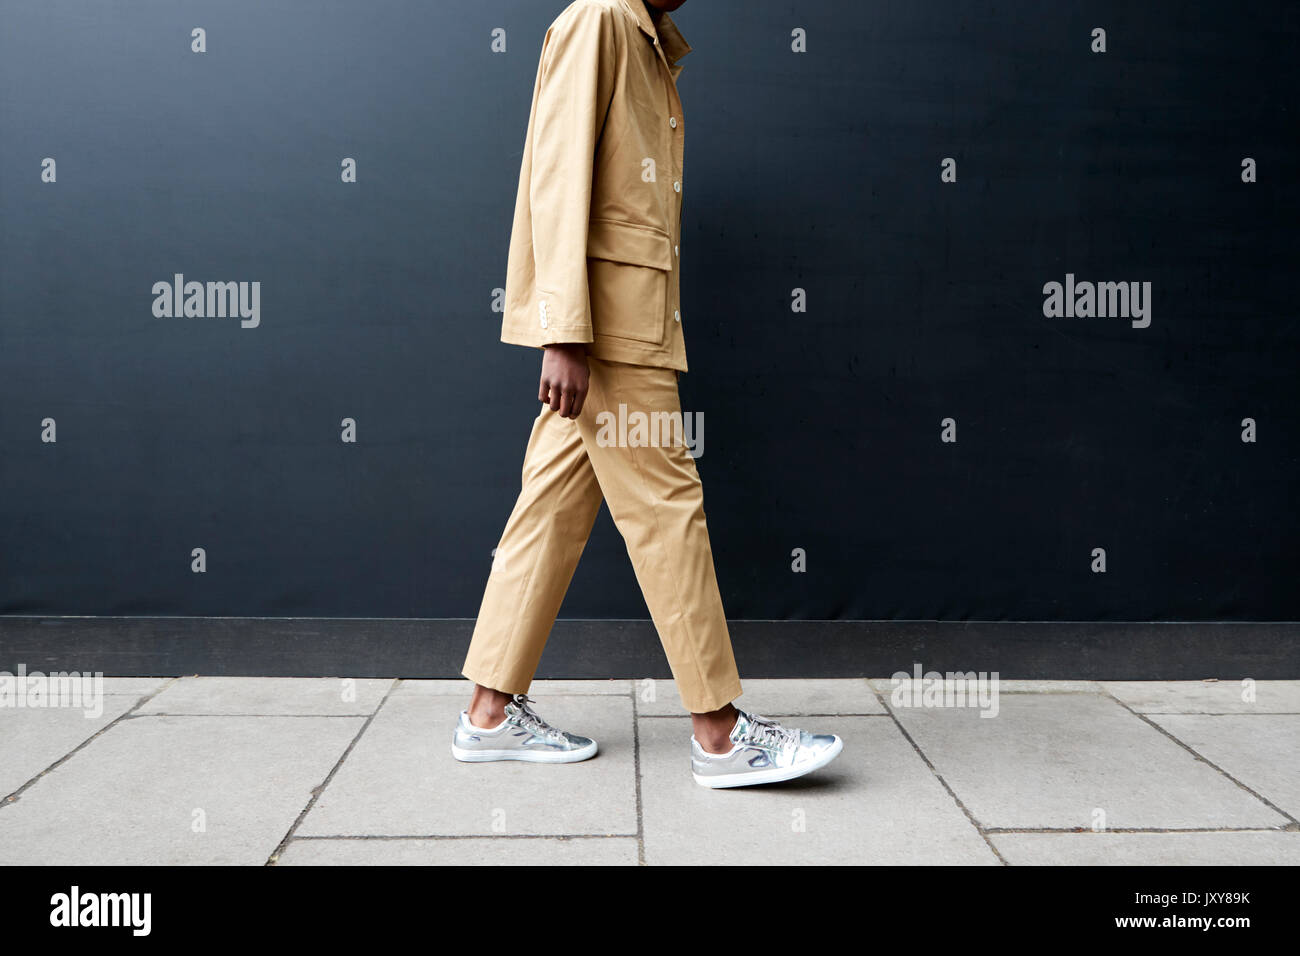 Low section side view of man in safari style suit Stock Photo